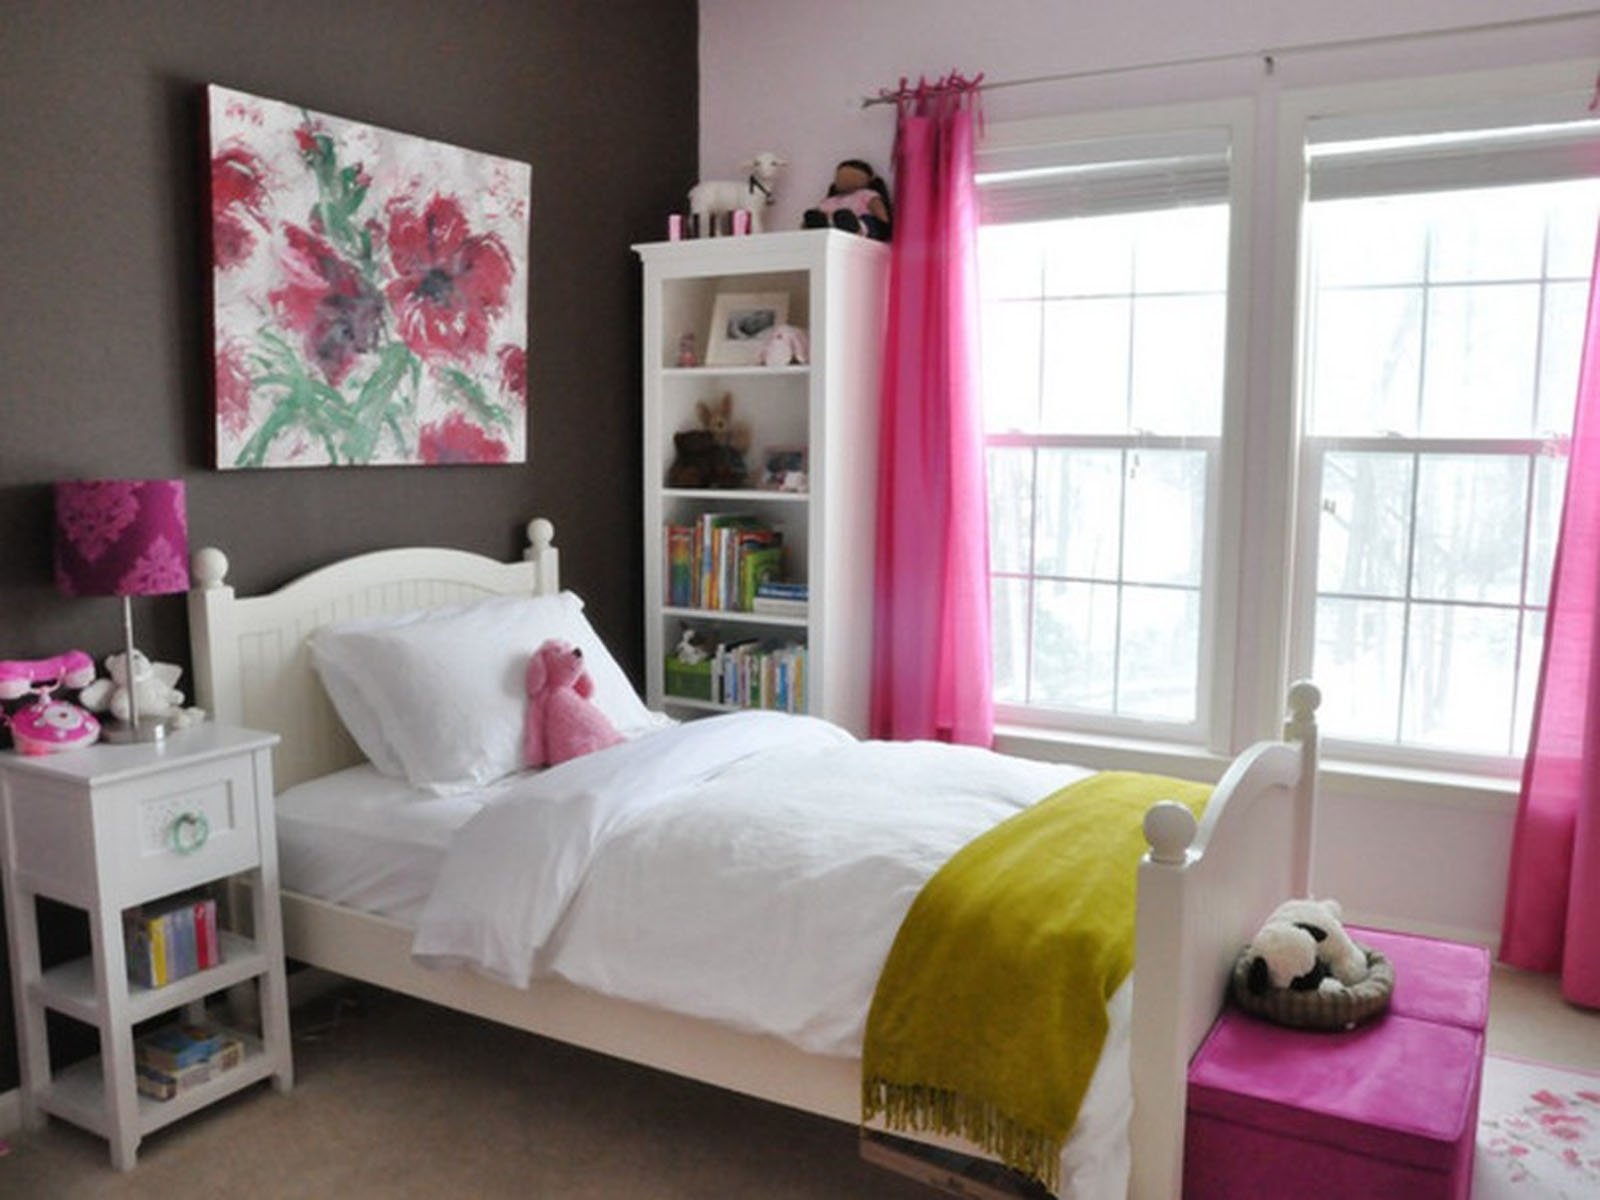 10 Most Recommended Small Bedroom Ideas For Teenage Girls designs for teenage girl bedrooms small bedroom ideas for teenage 2022